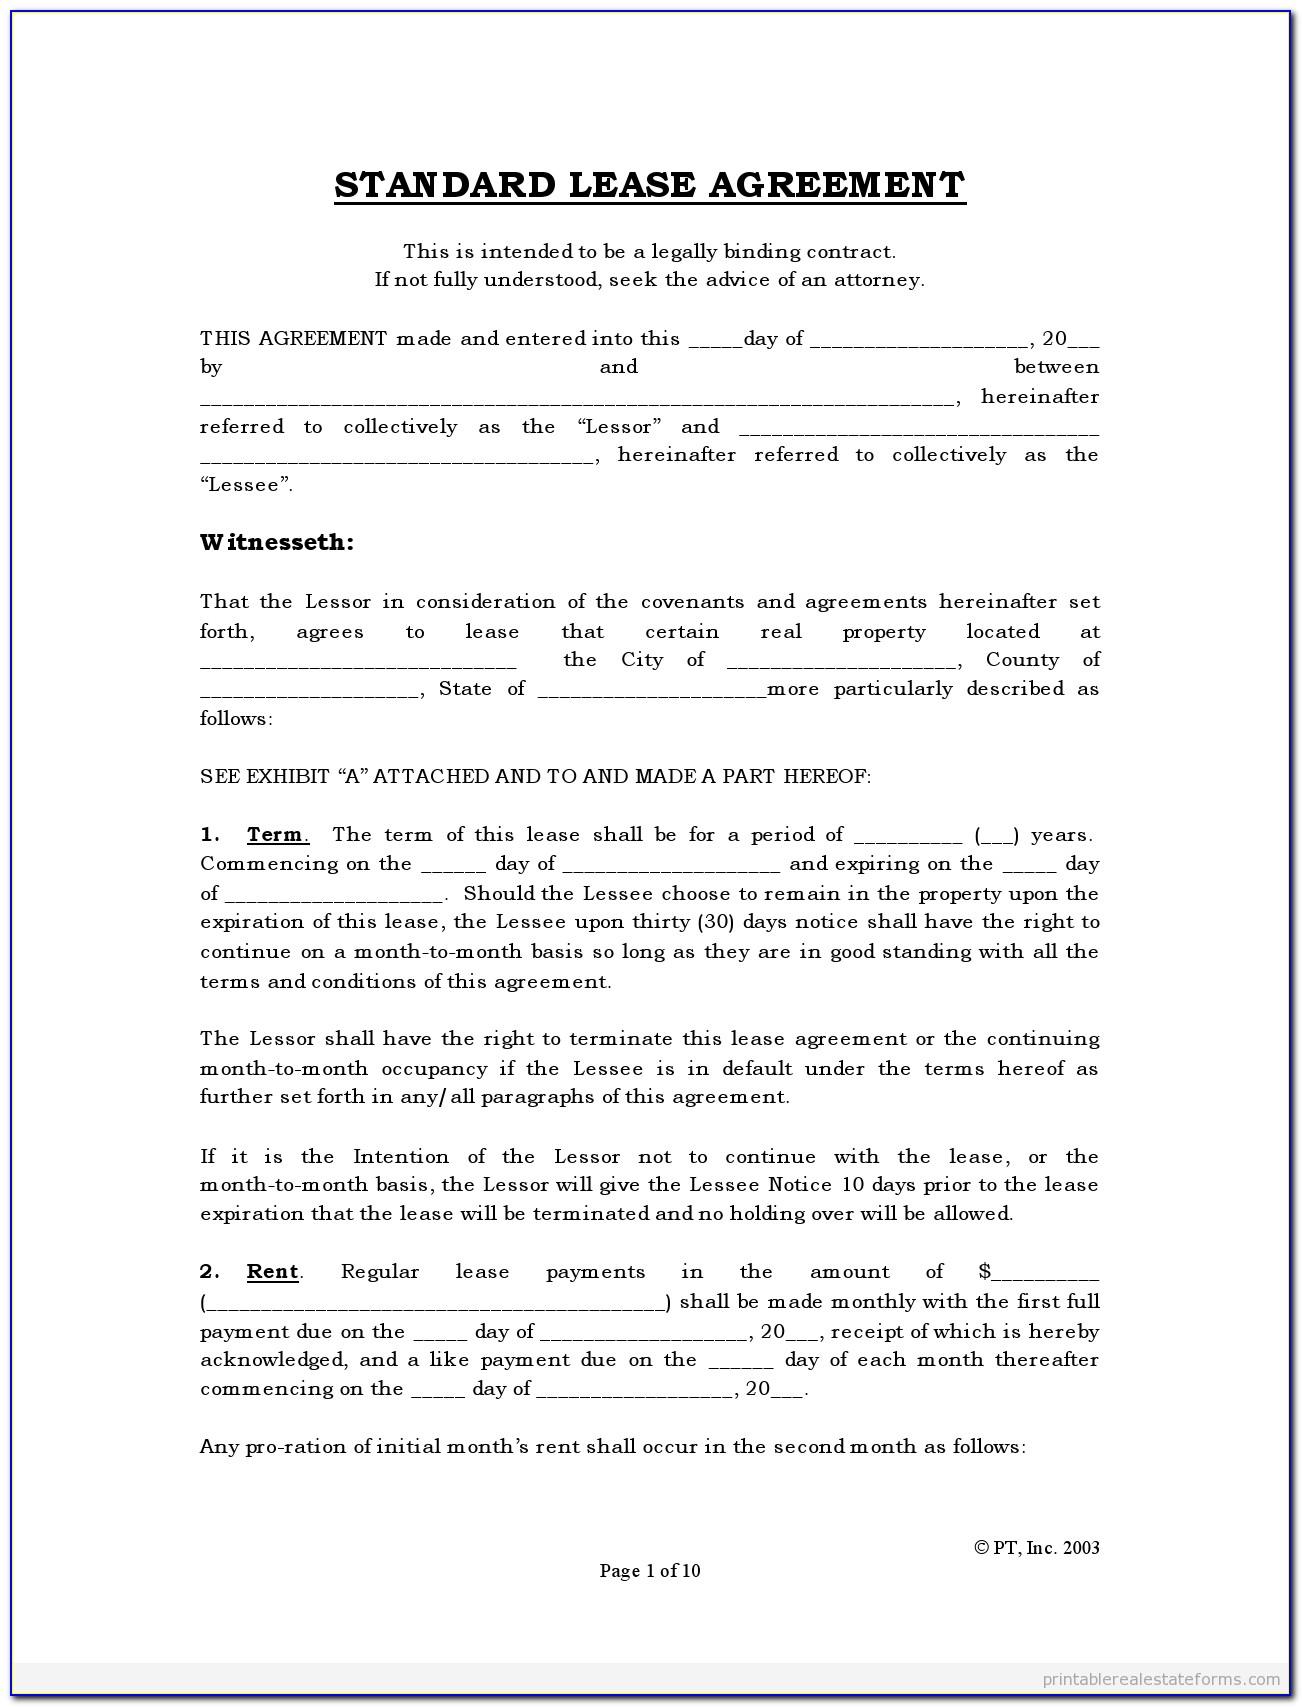 Rental Agreement Contract Sample